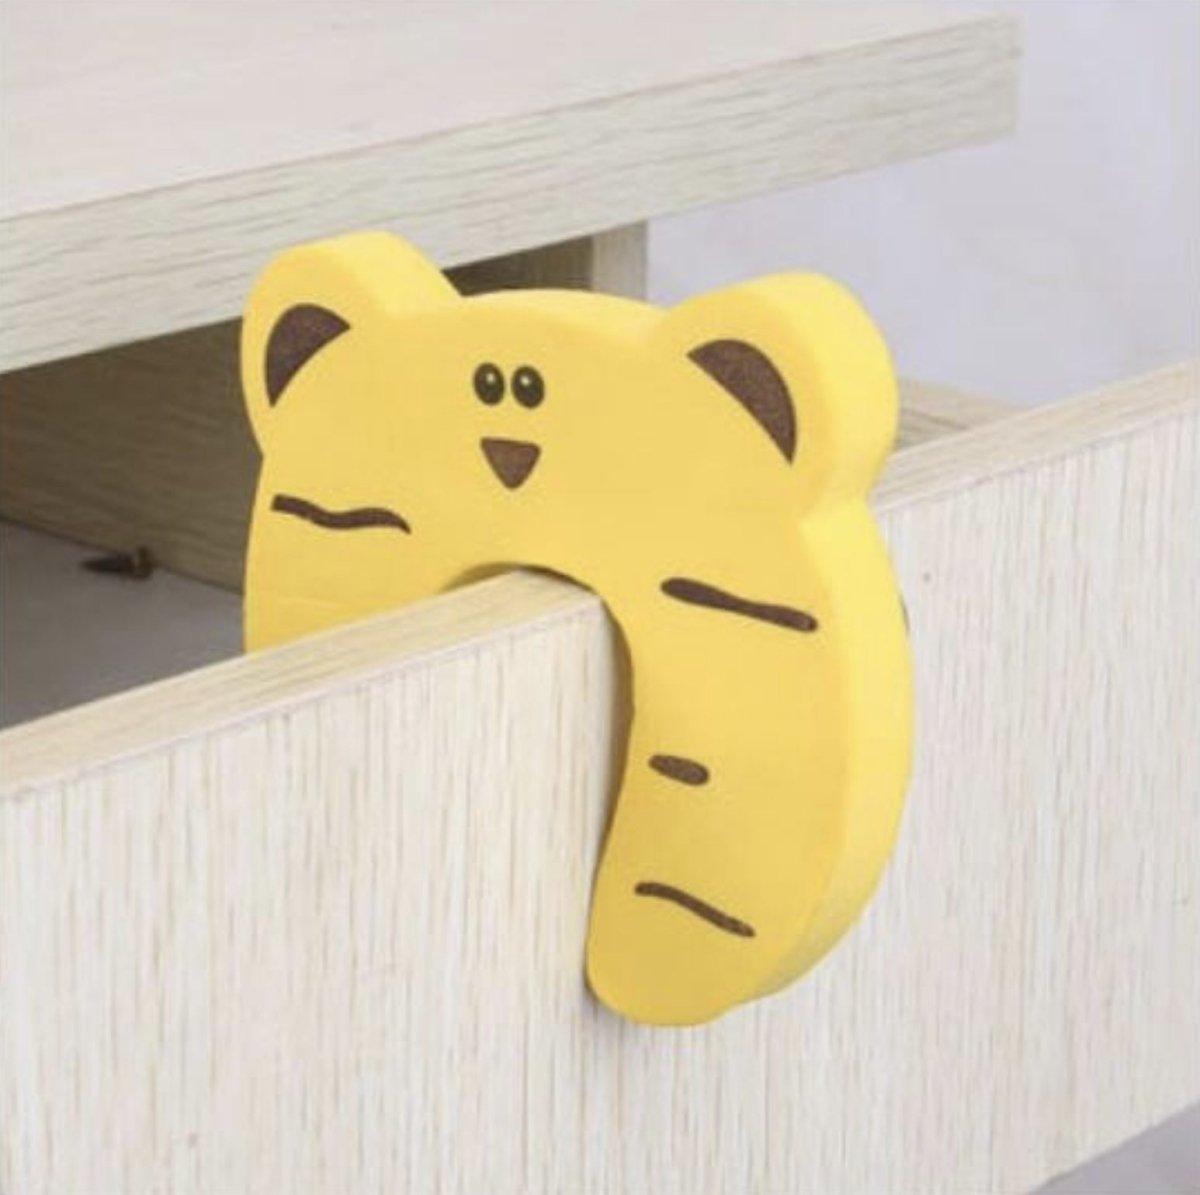 Cute cartoon animal modeling safety children's door stop enlarged and thickened NP-HTERA-904 - CHL-STORE 